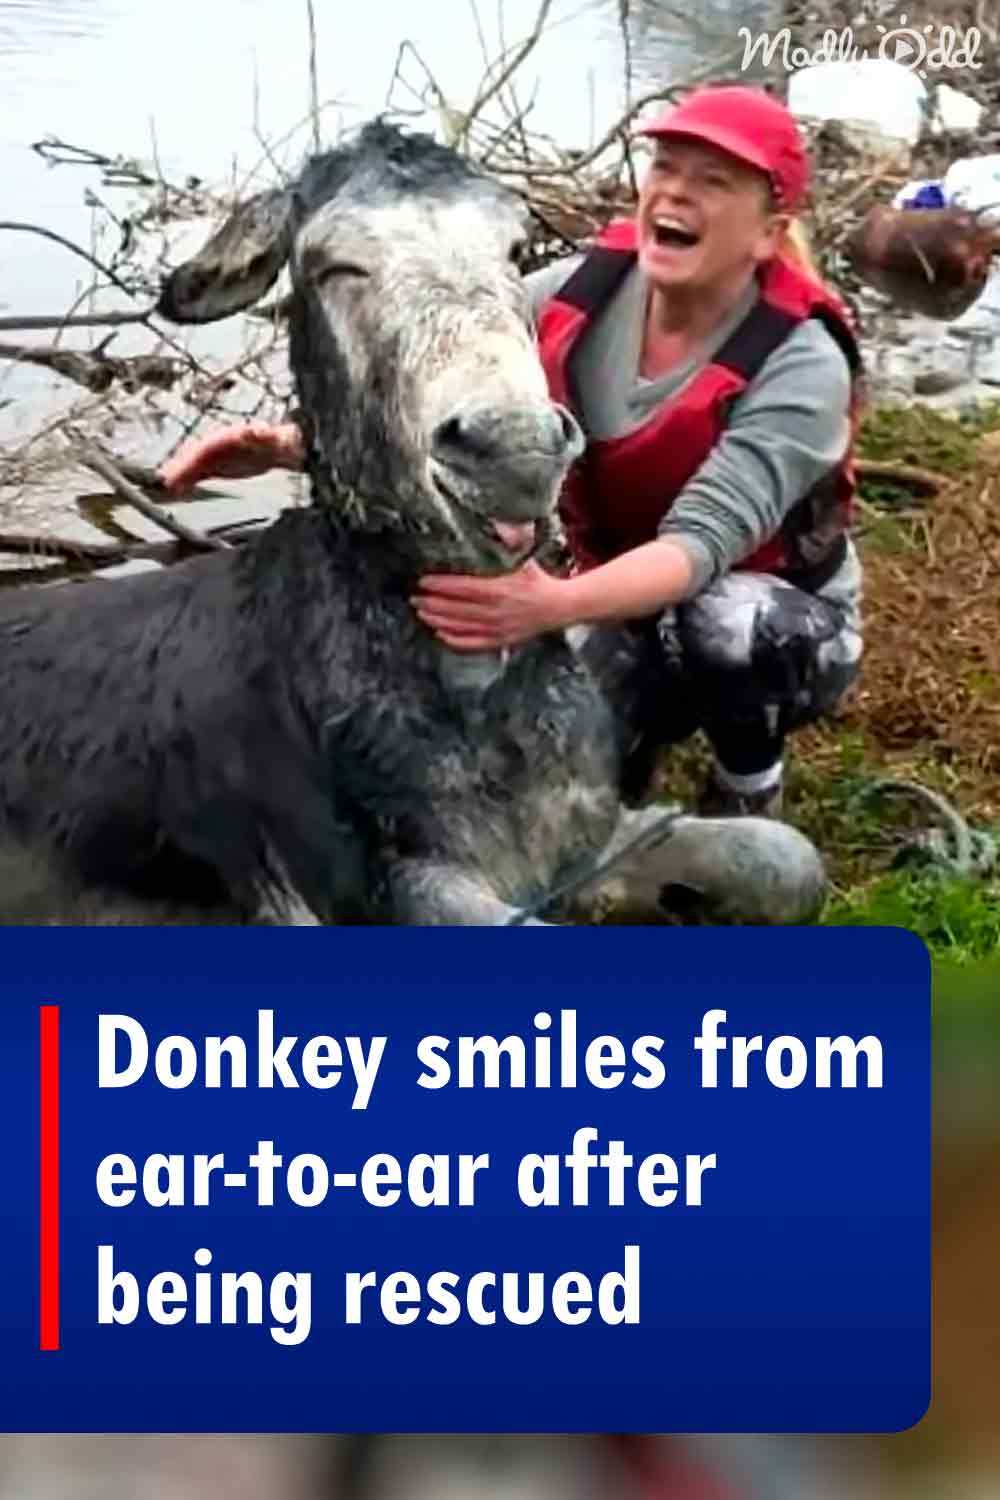 Donkey smiles from ear-to-ear after being rescued